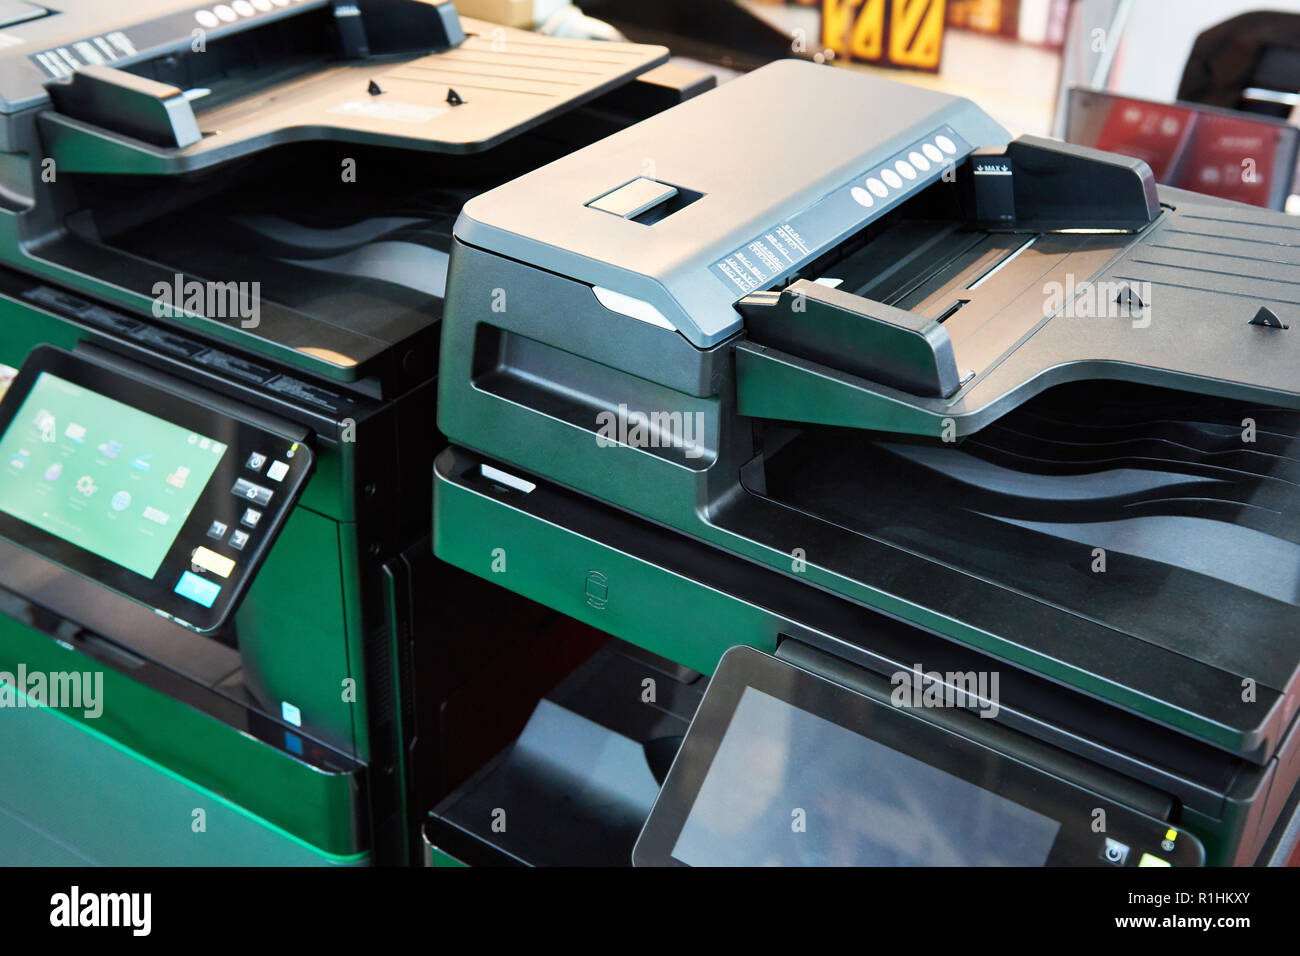 Office equipment printers and copiers Stock Photo